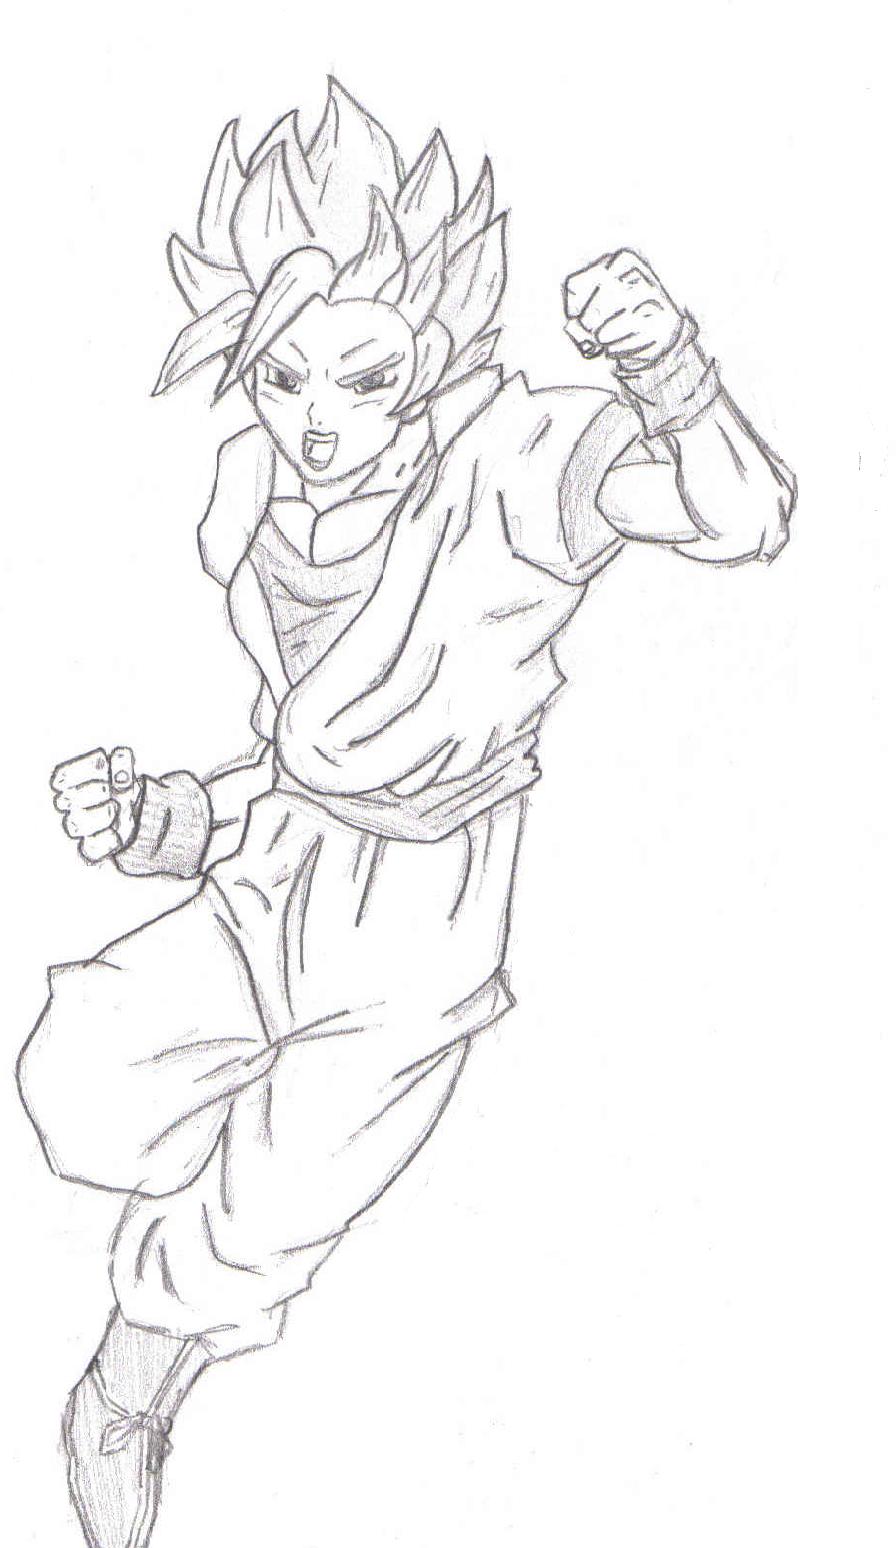 Goku (requested from stinger) by kilgorin